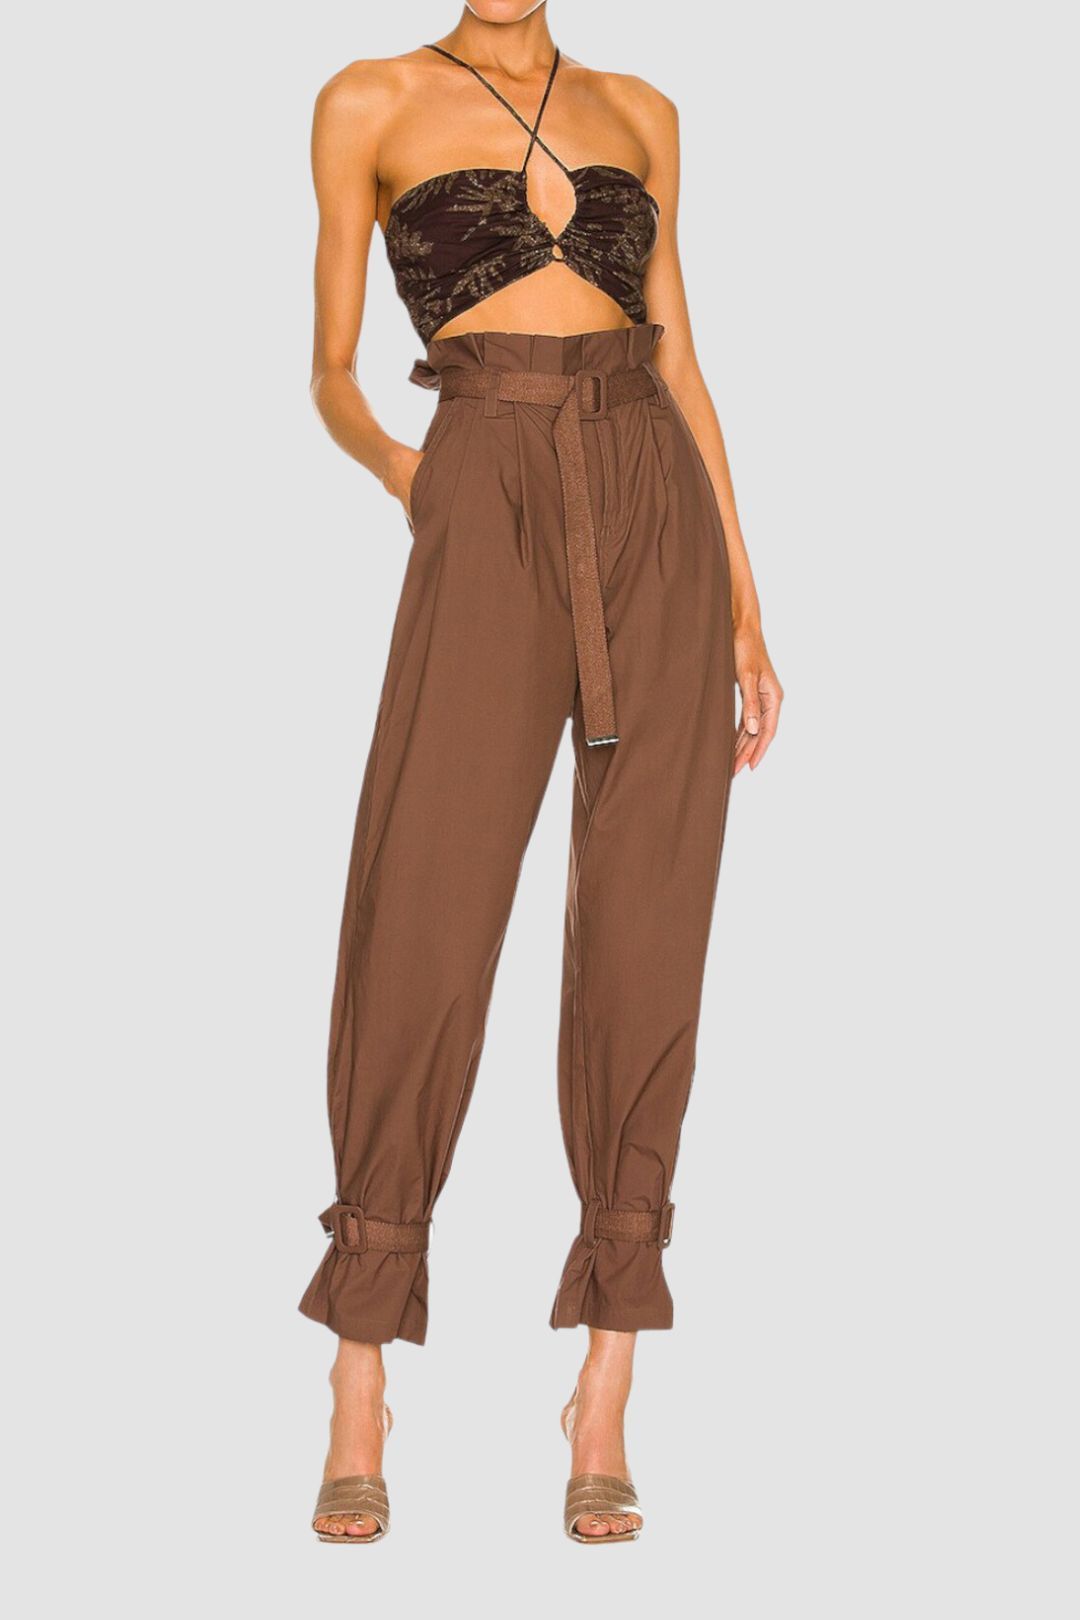 Desert Palm Cropped Top in Brown